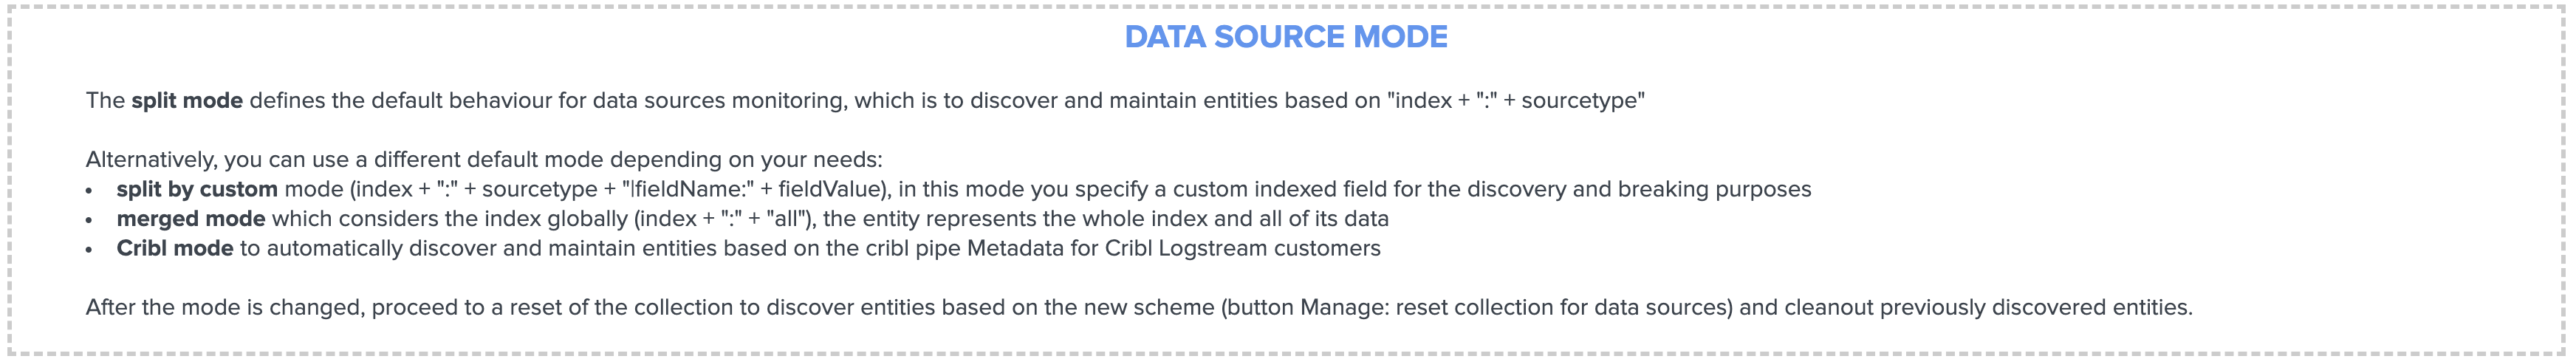 ui_data_sources_mode.png